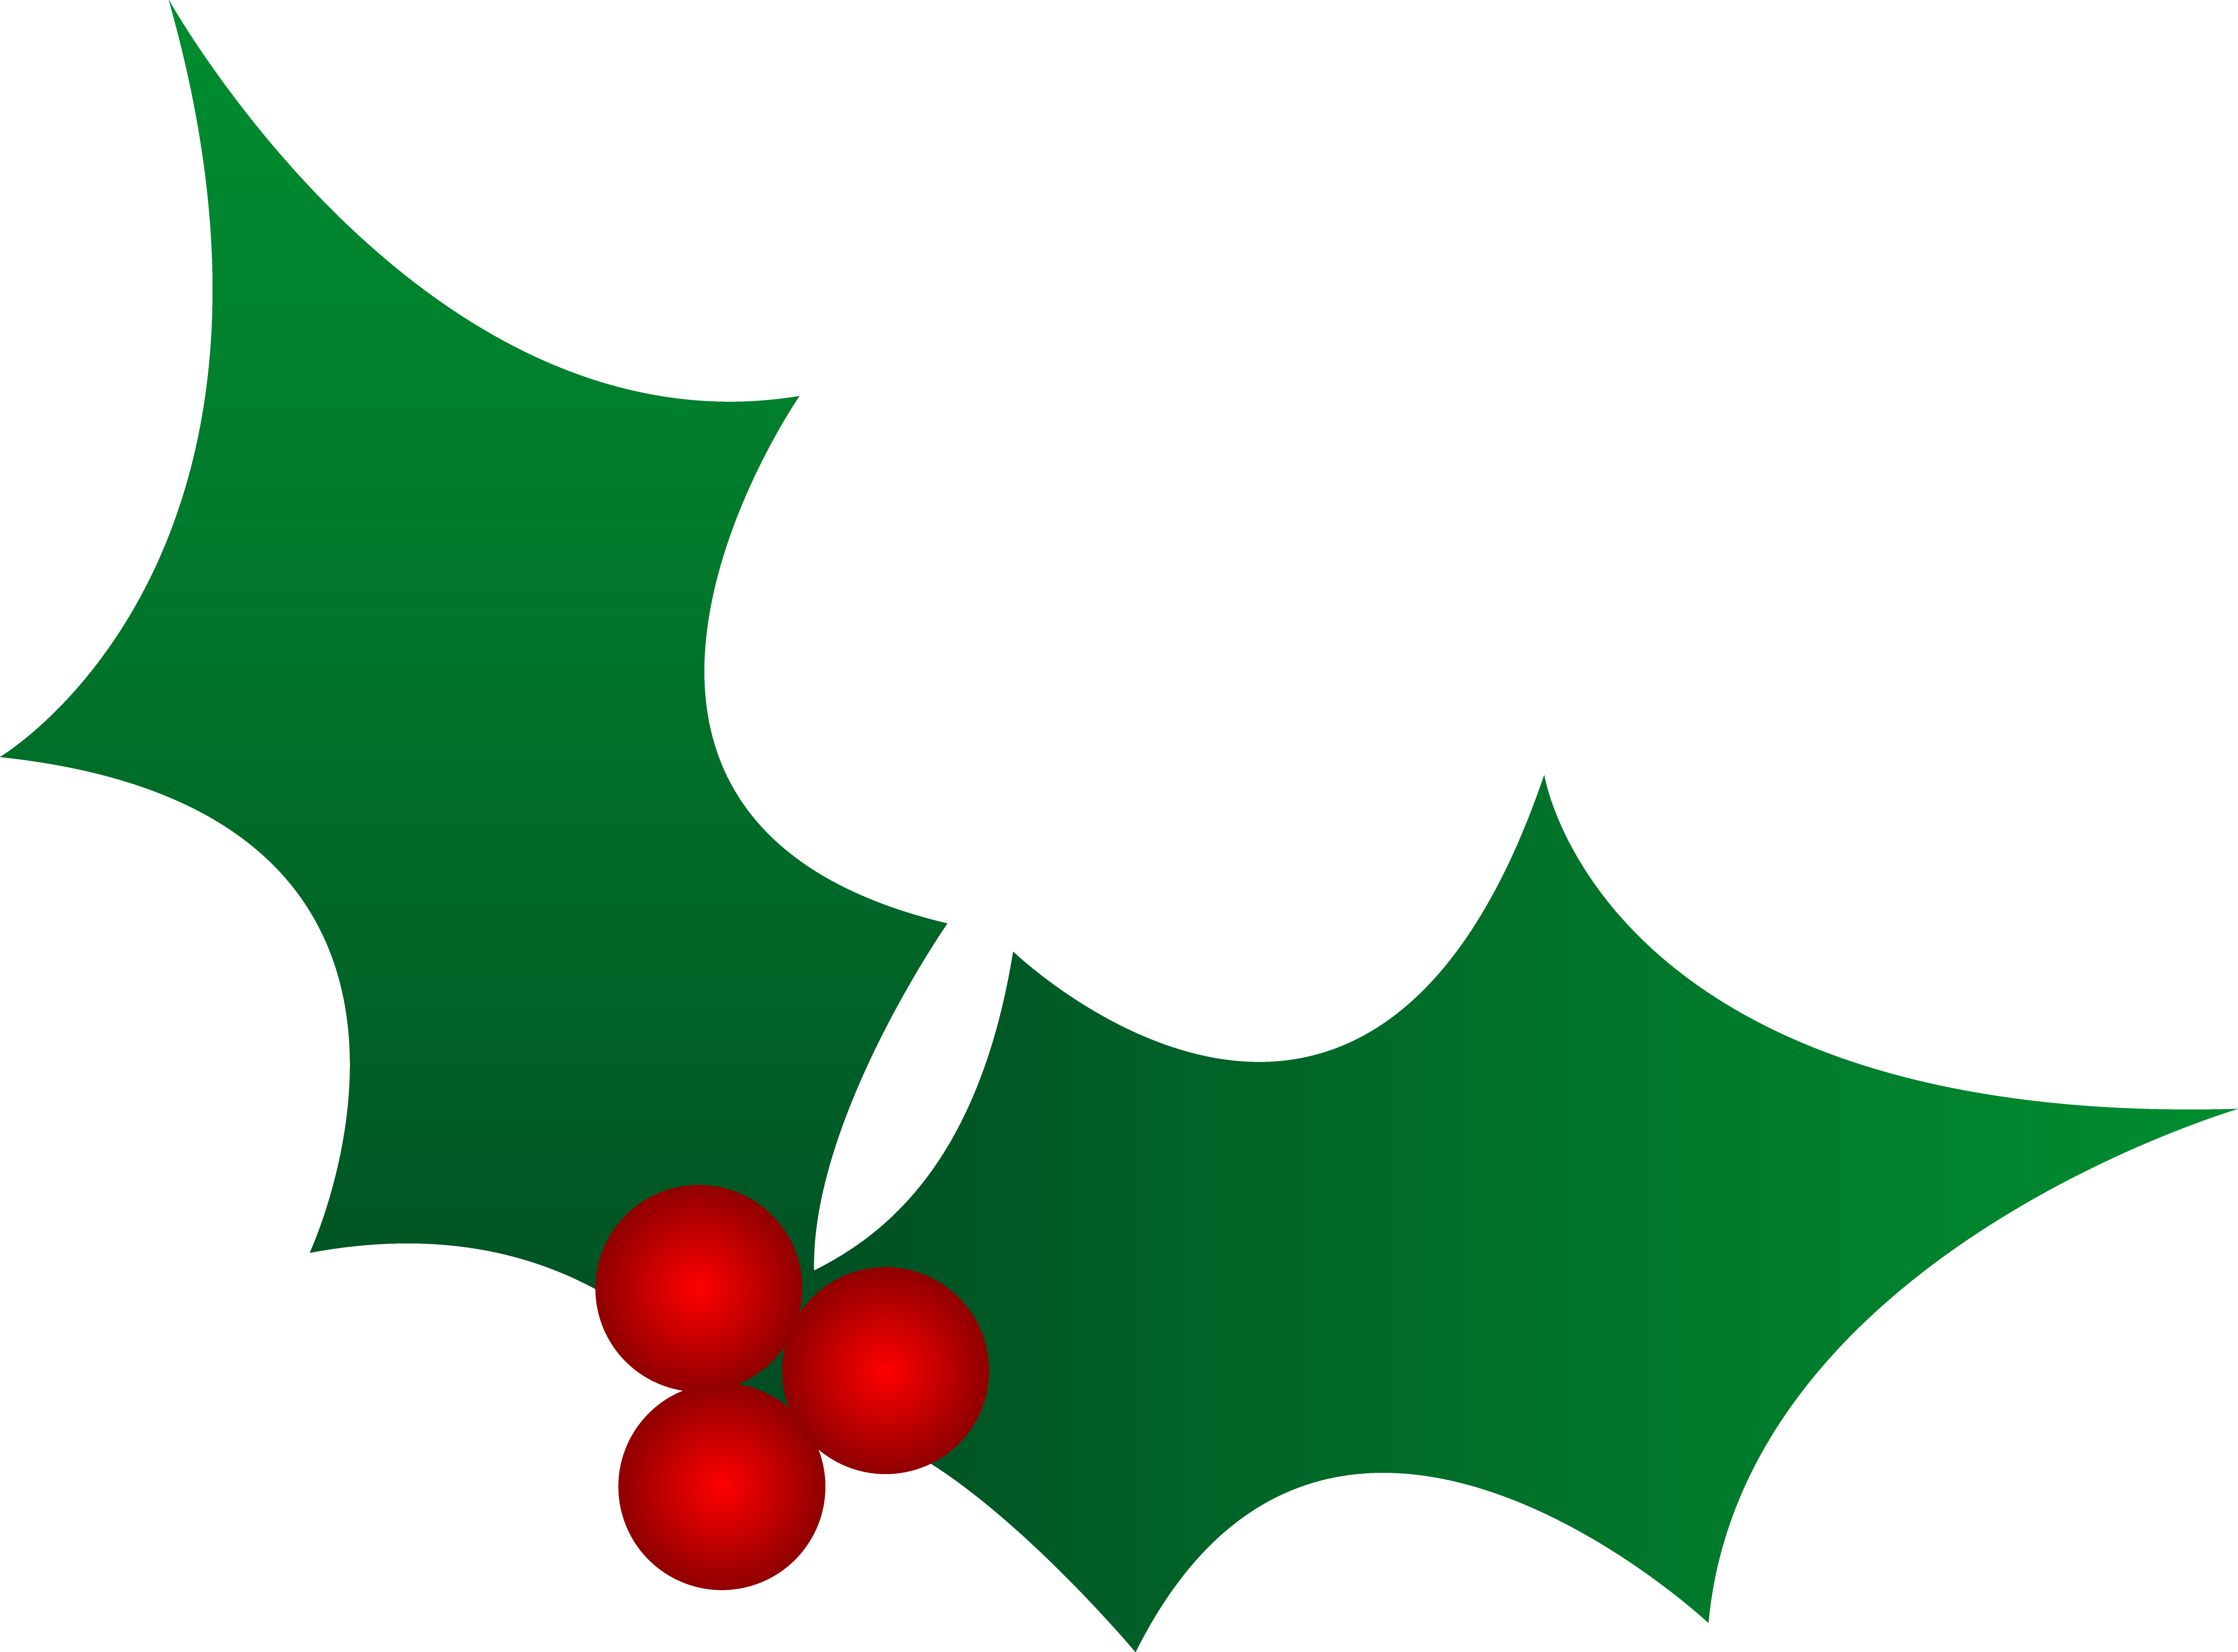 christmas holly clipart - Free Holly Clipart